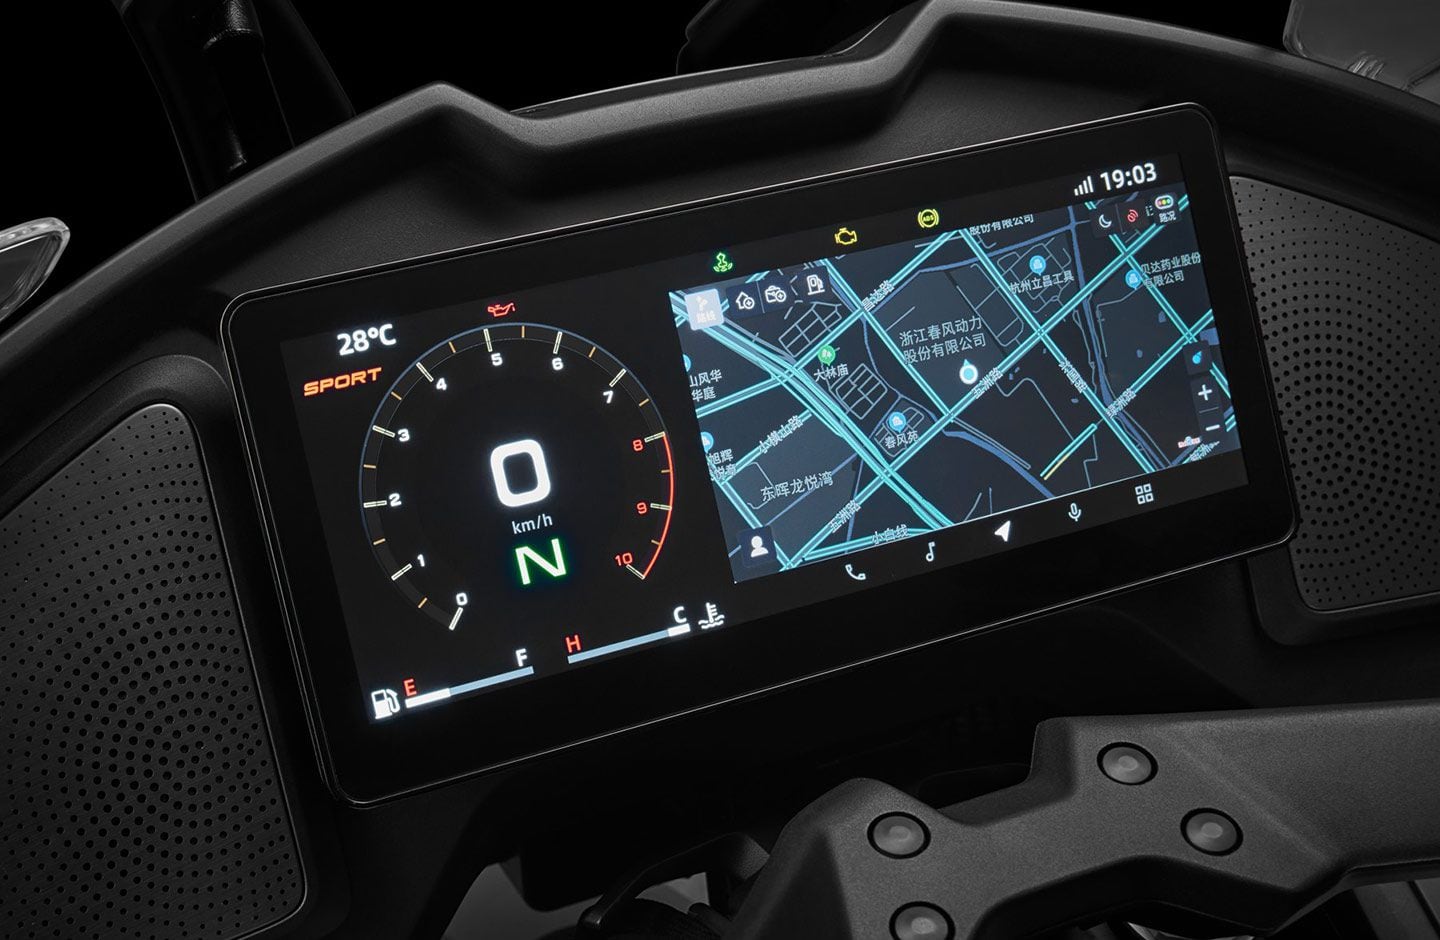 The 1250 TR-G utilizes the largest TFT dash in production.